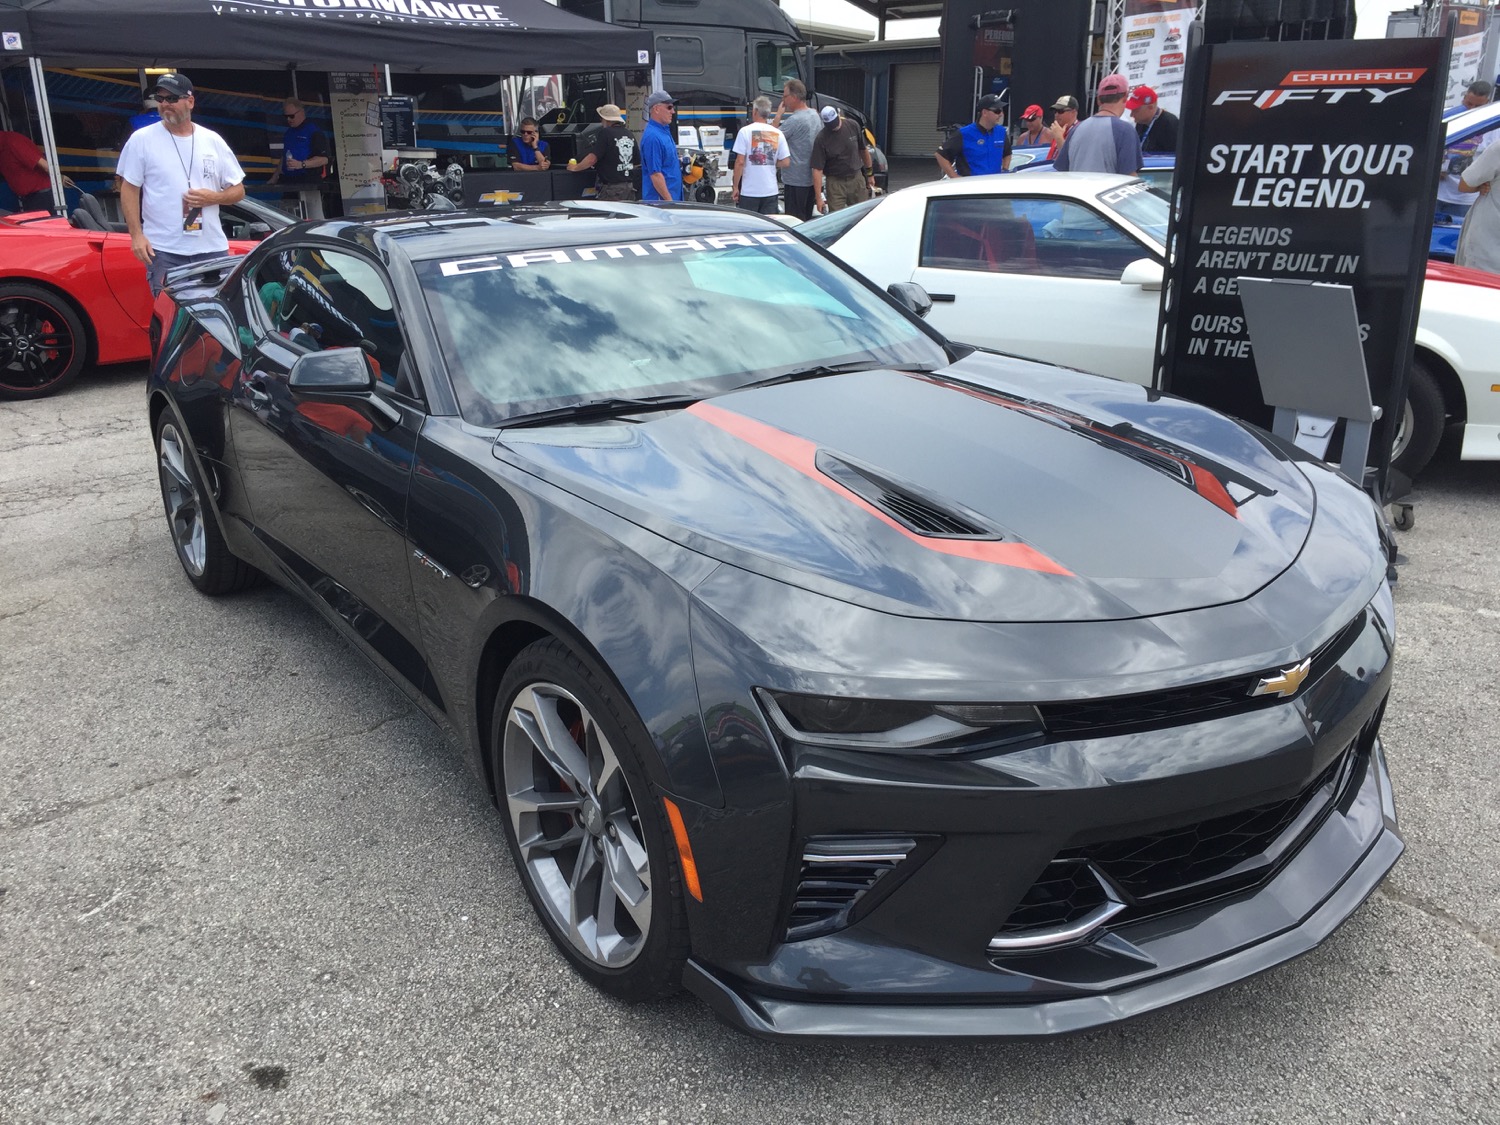 2017 Camaro 50th Anniversary Edition Info, Pictures & More | GM Authority